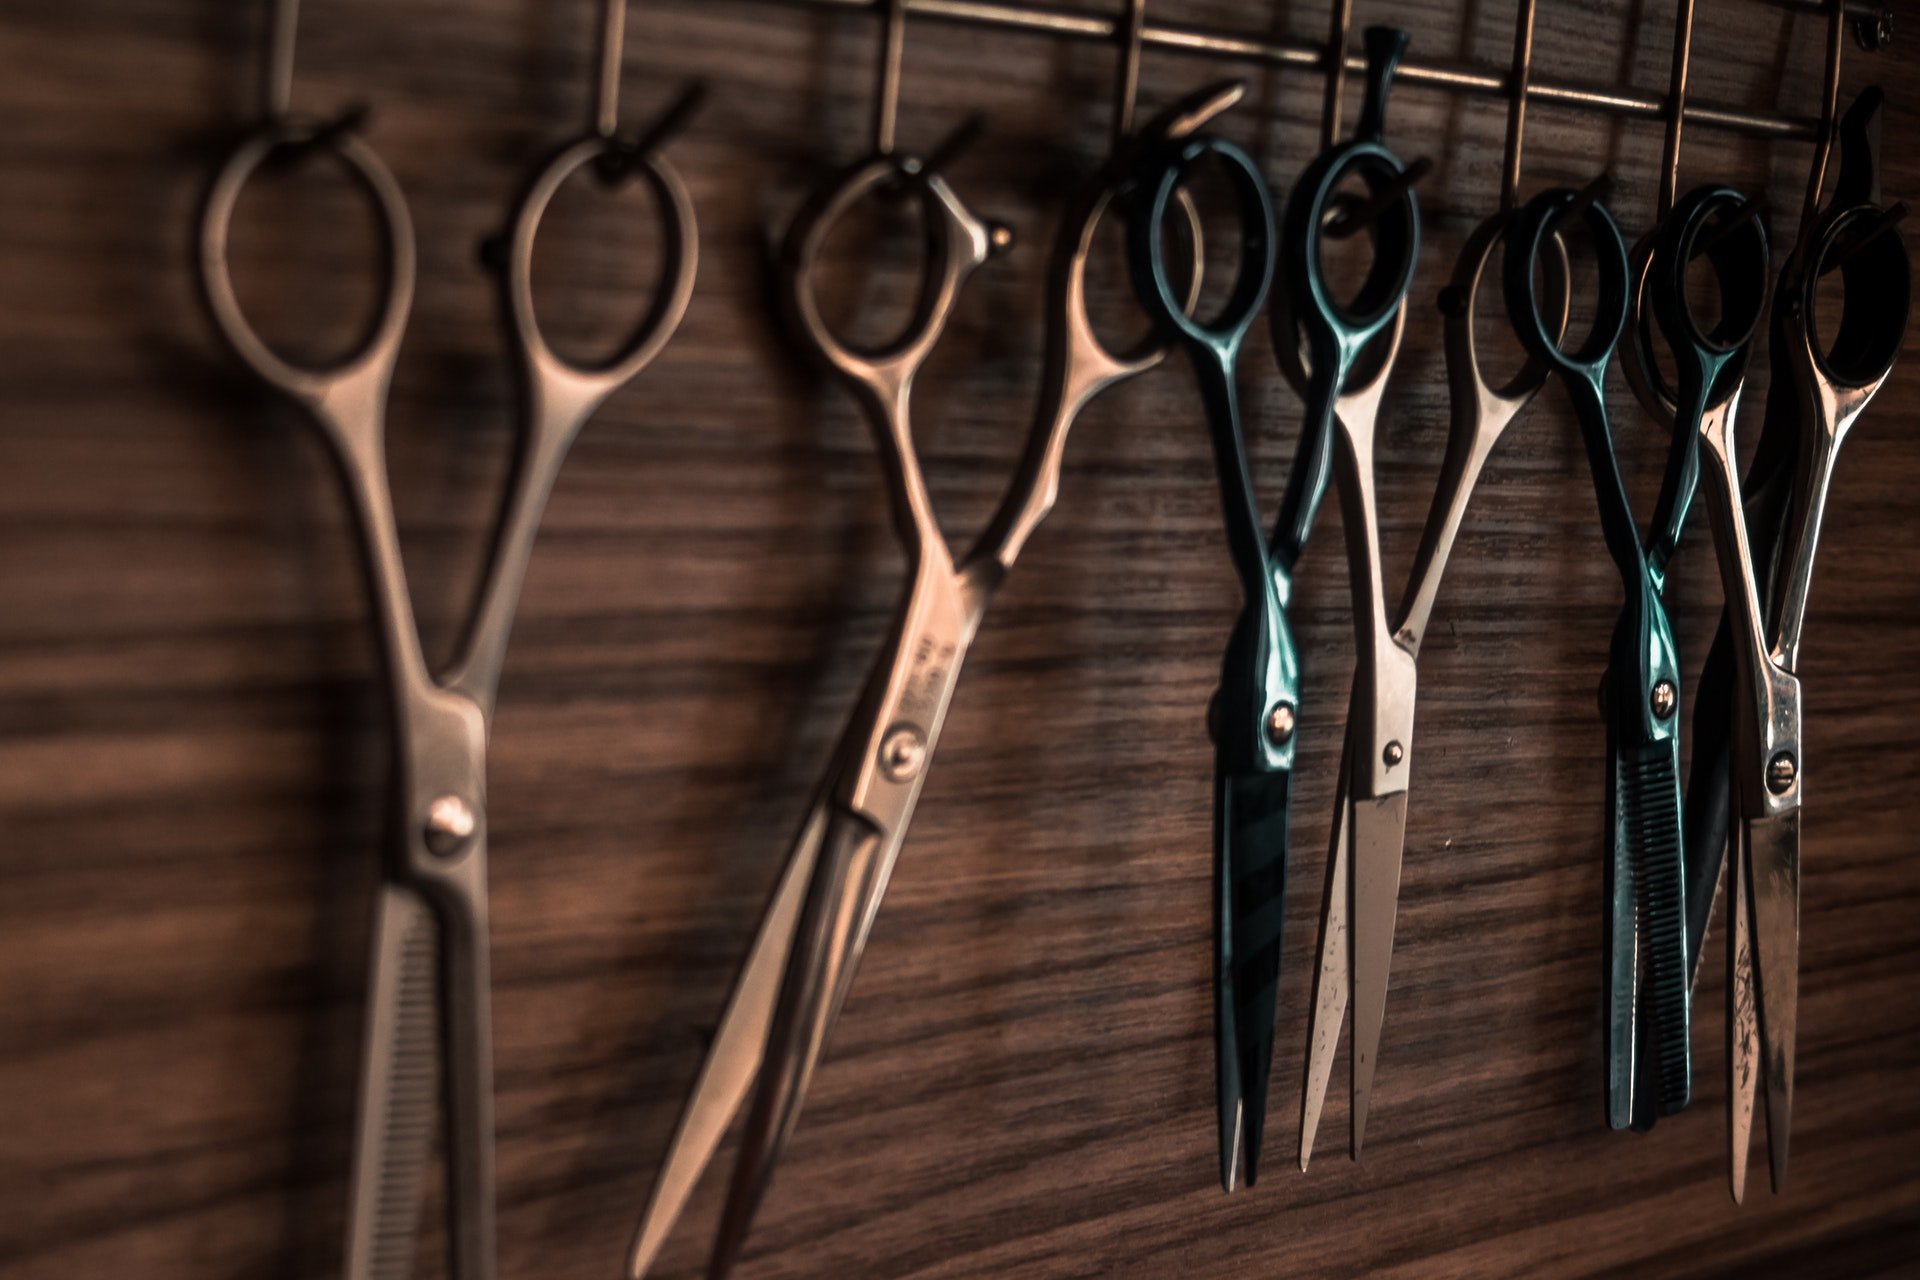 Photo of different types of scissors hanging on the wall | Photo: Pexels